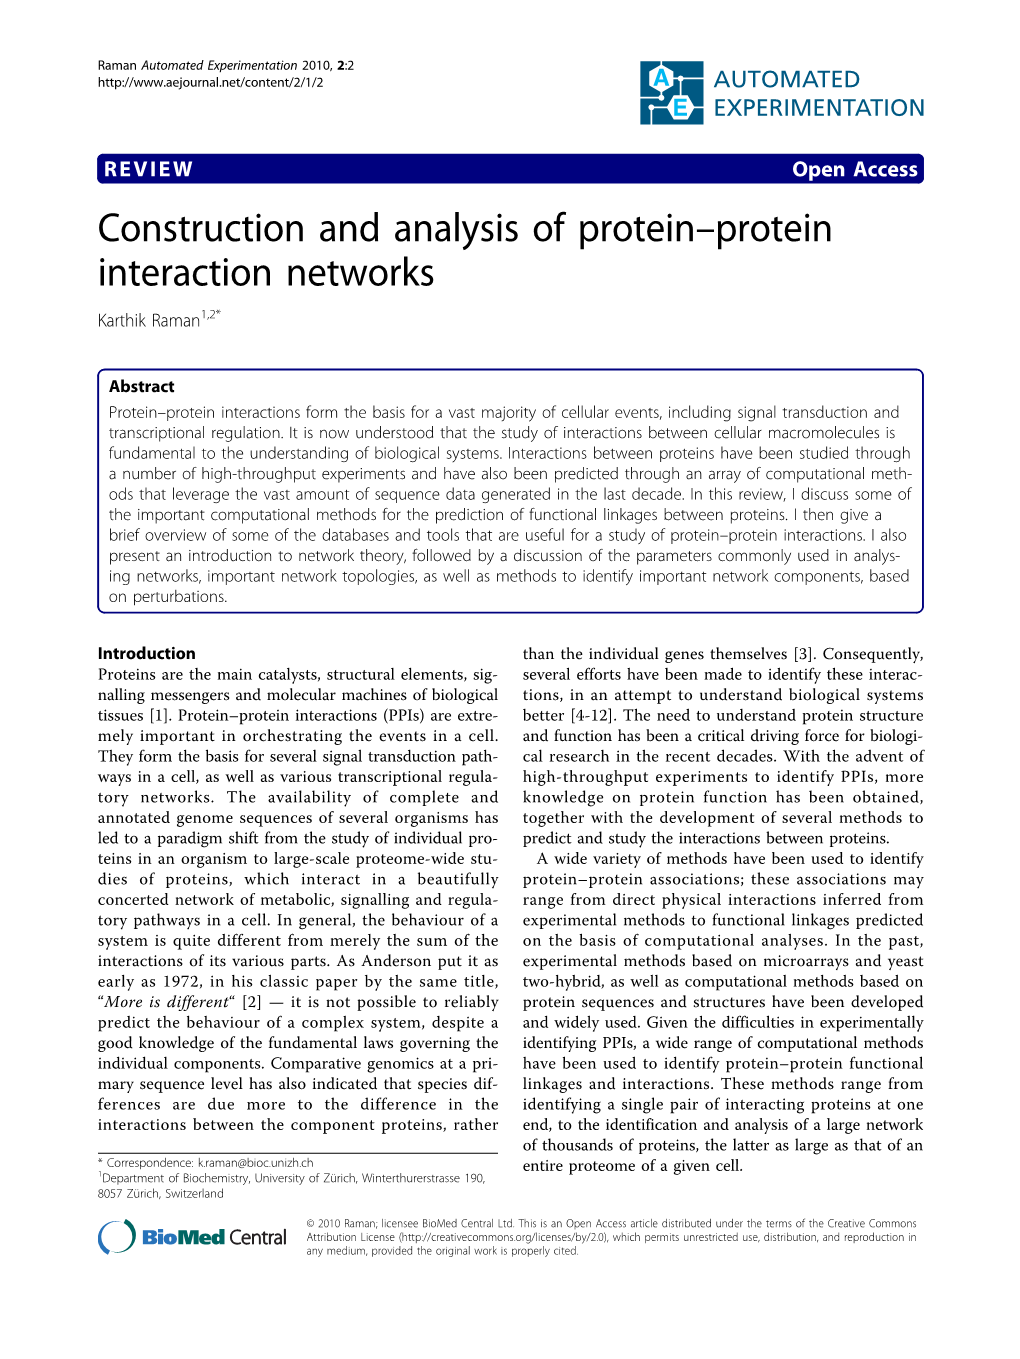 Construction and Analysis of Protein-Protein Interaction Networks